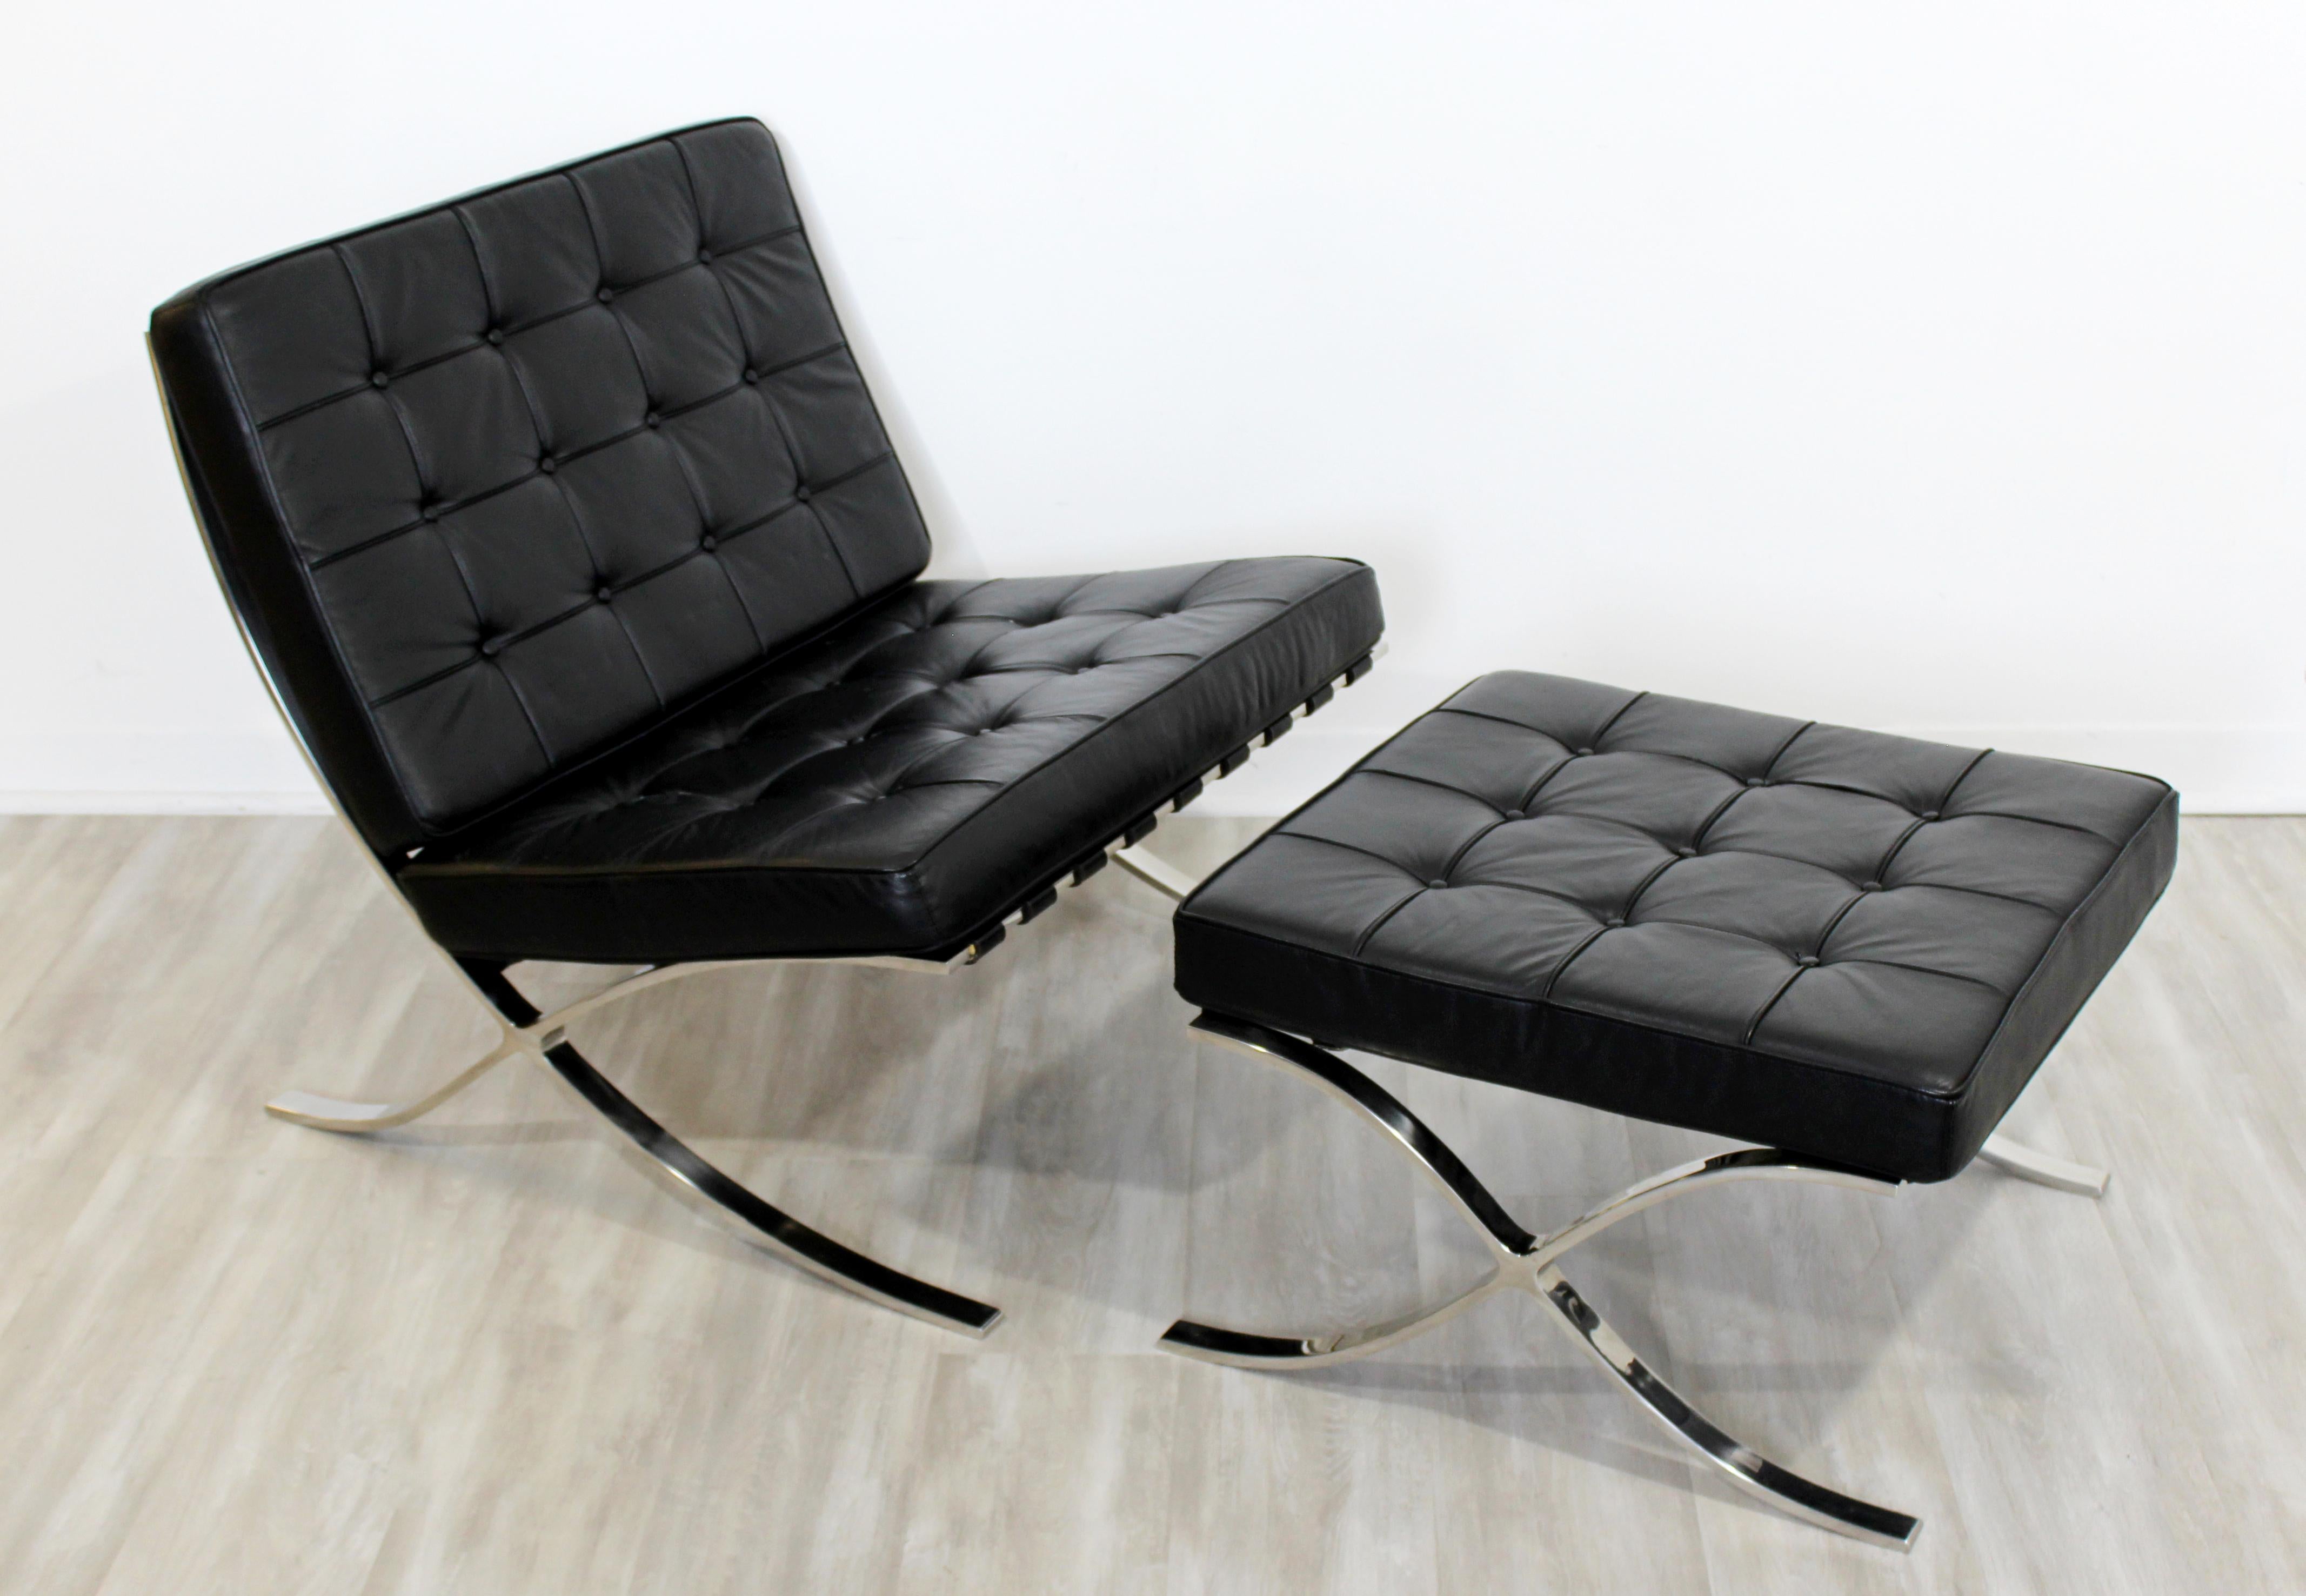 For your consideration is a Barcelona style chrome lounge chair and ottoman, with black leather upholstery, circa 1970s. In good vintage condition, with some blemishes in the leather. The dimensions of the chair are 30